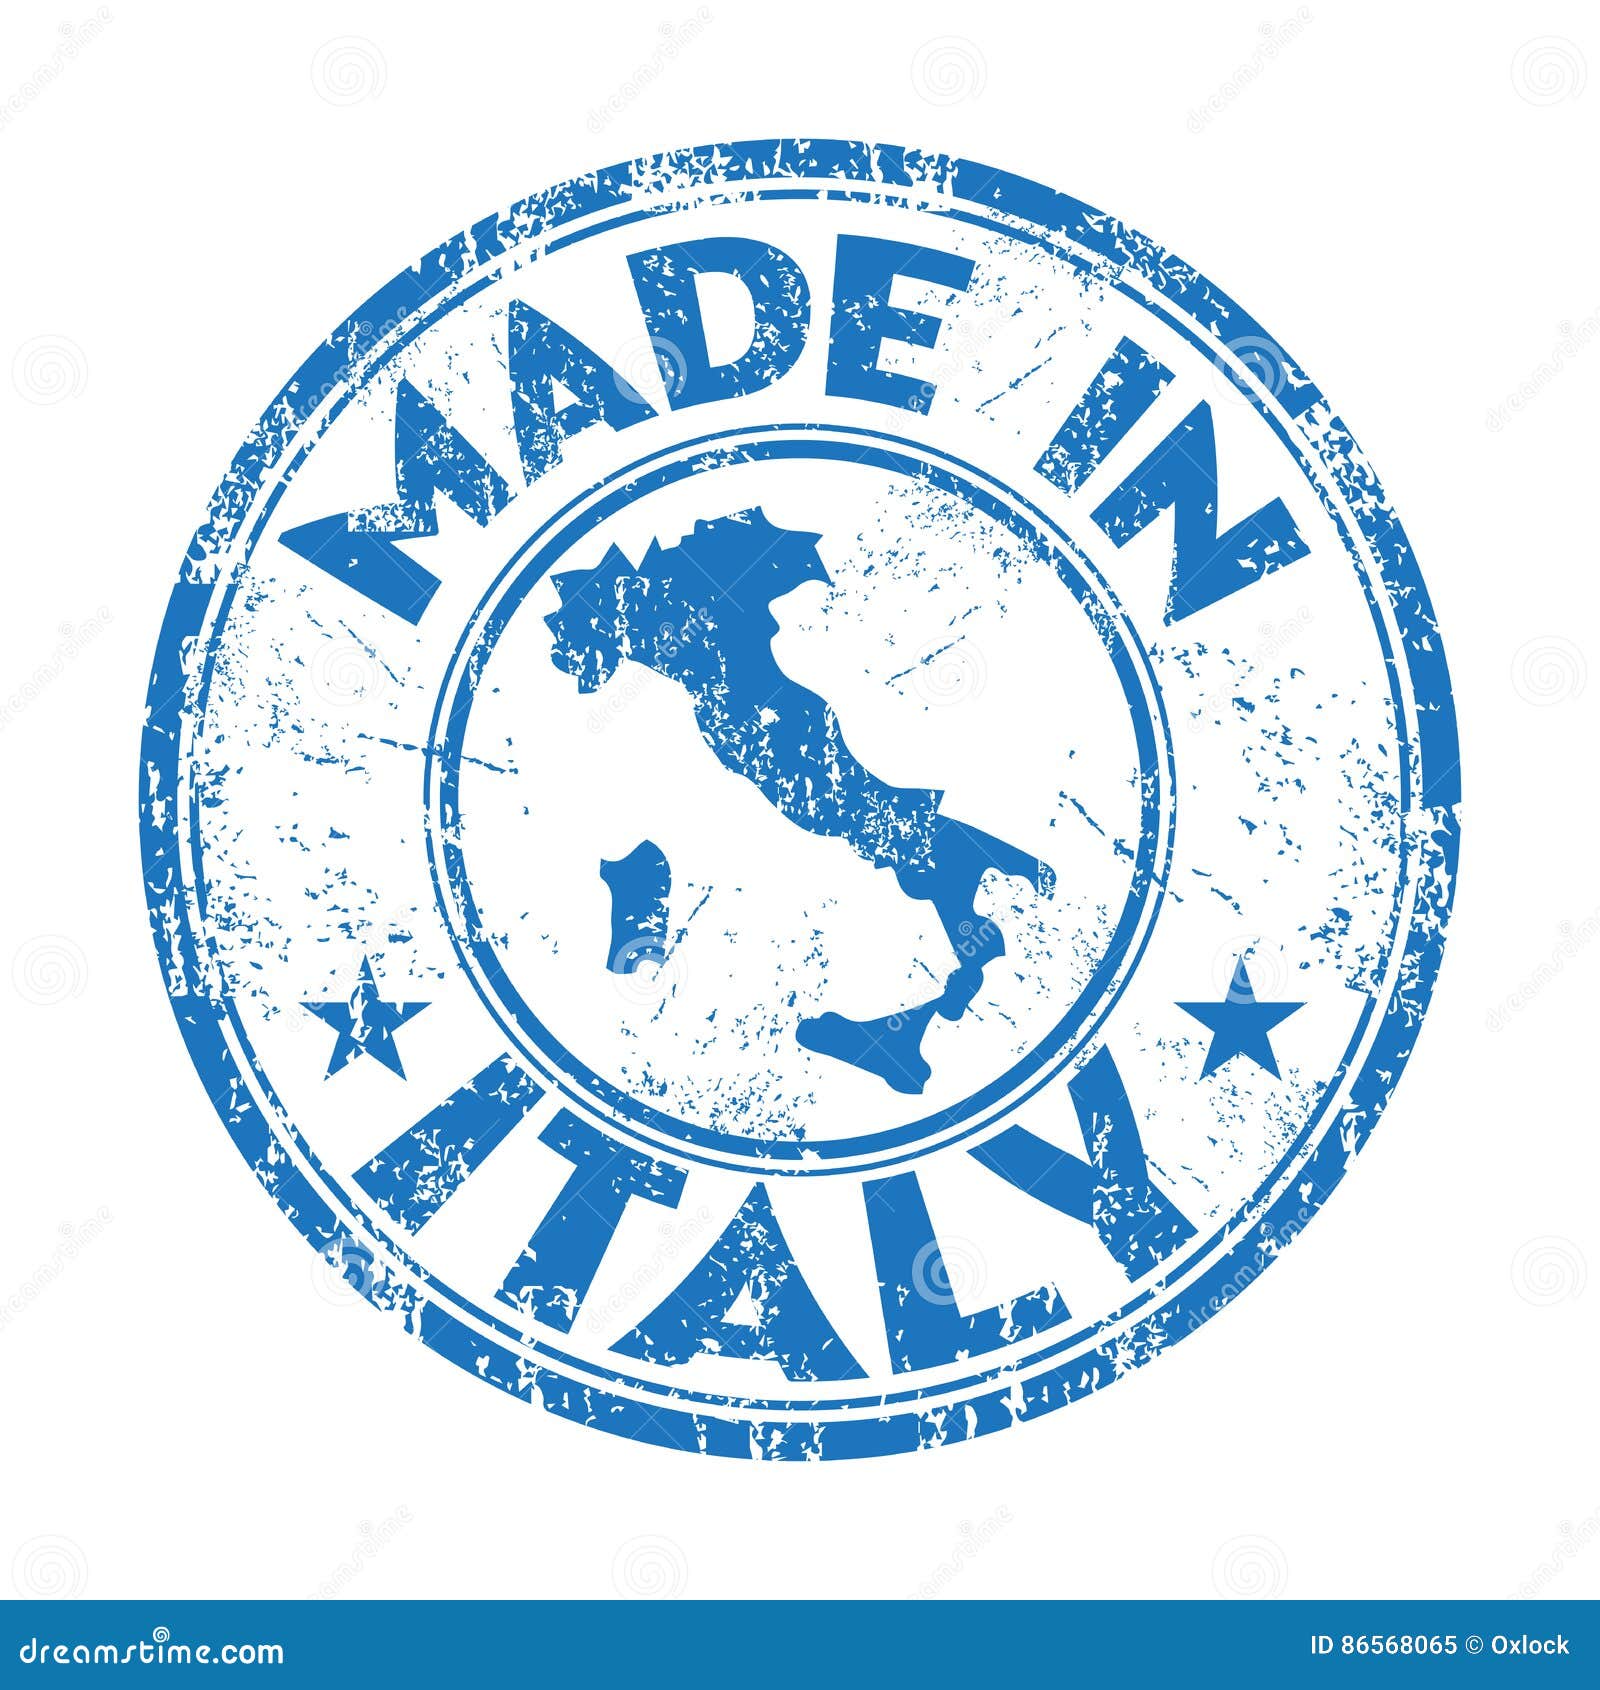 made in italy rubber stamp